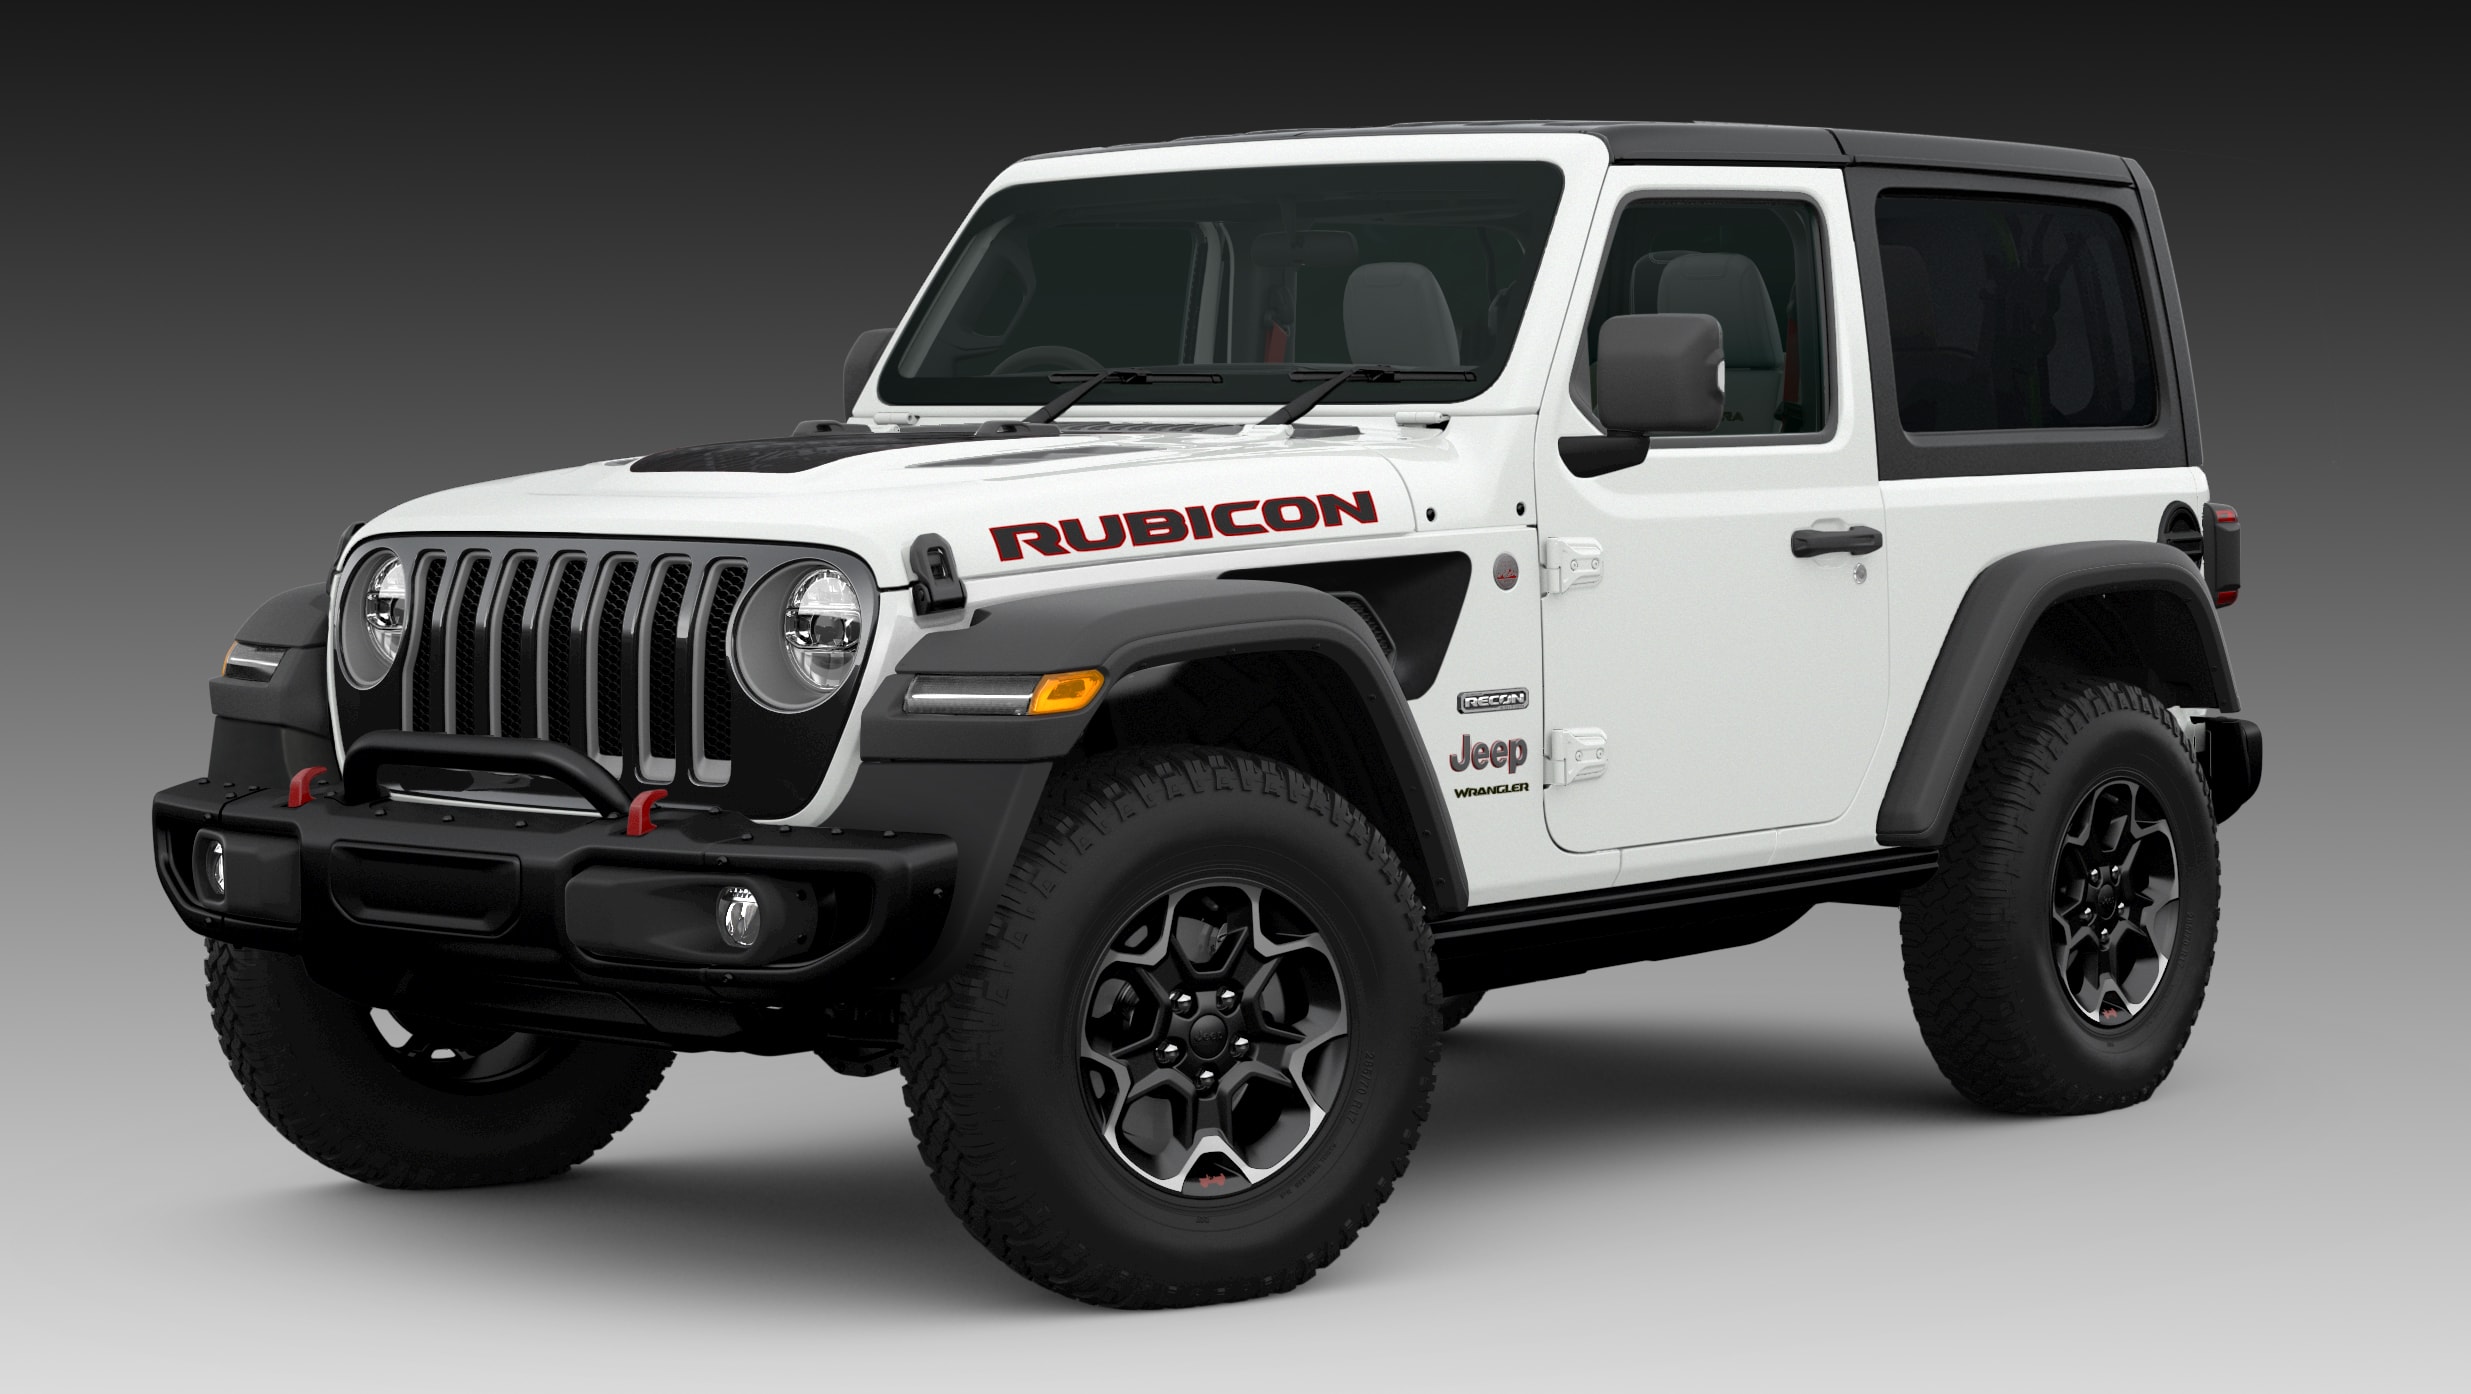 New Jeep Wrangler Rubicon Recon 2020 pricing and specs detailed: Two